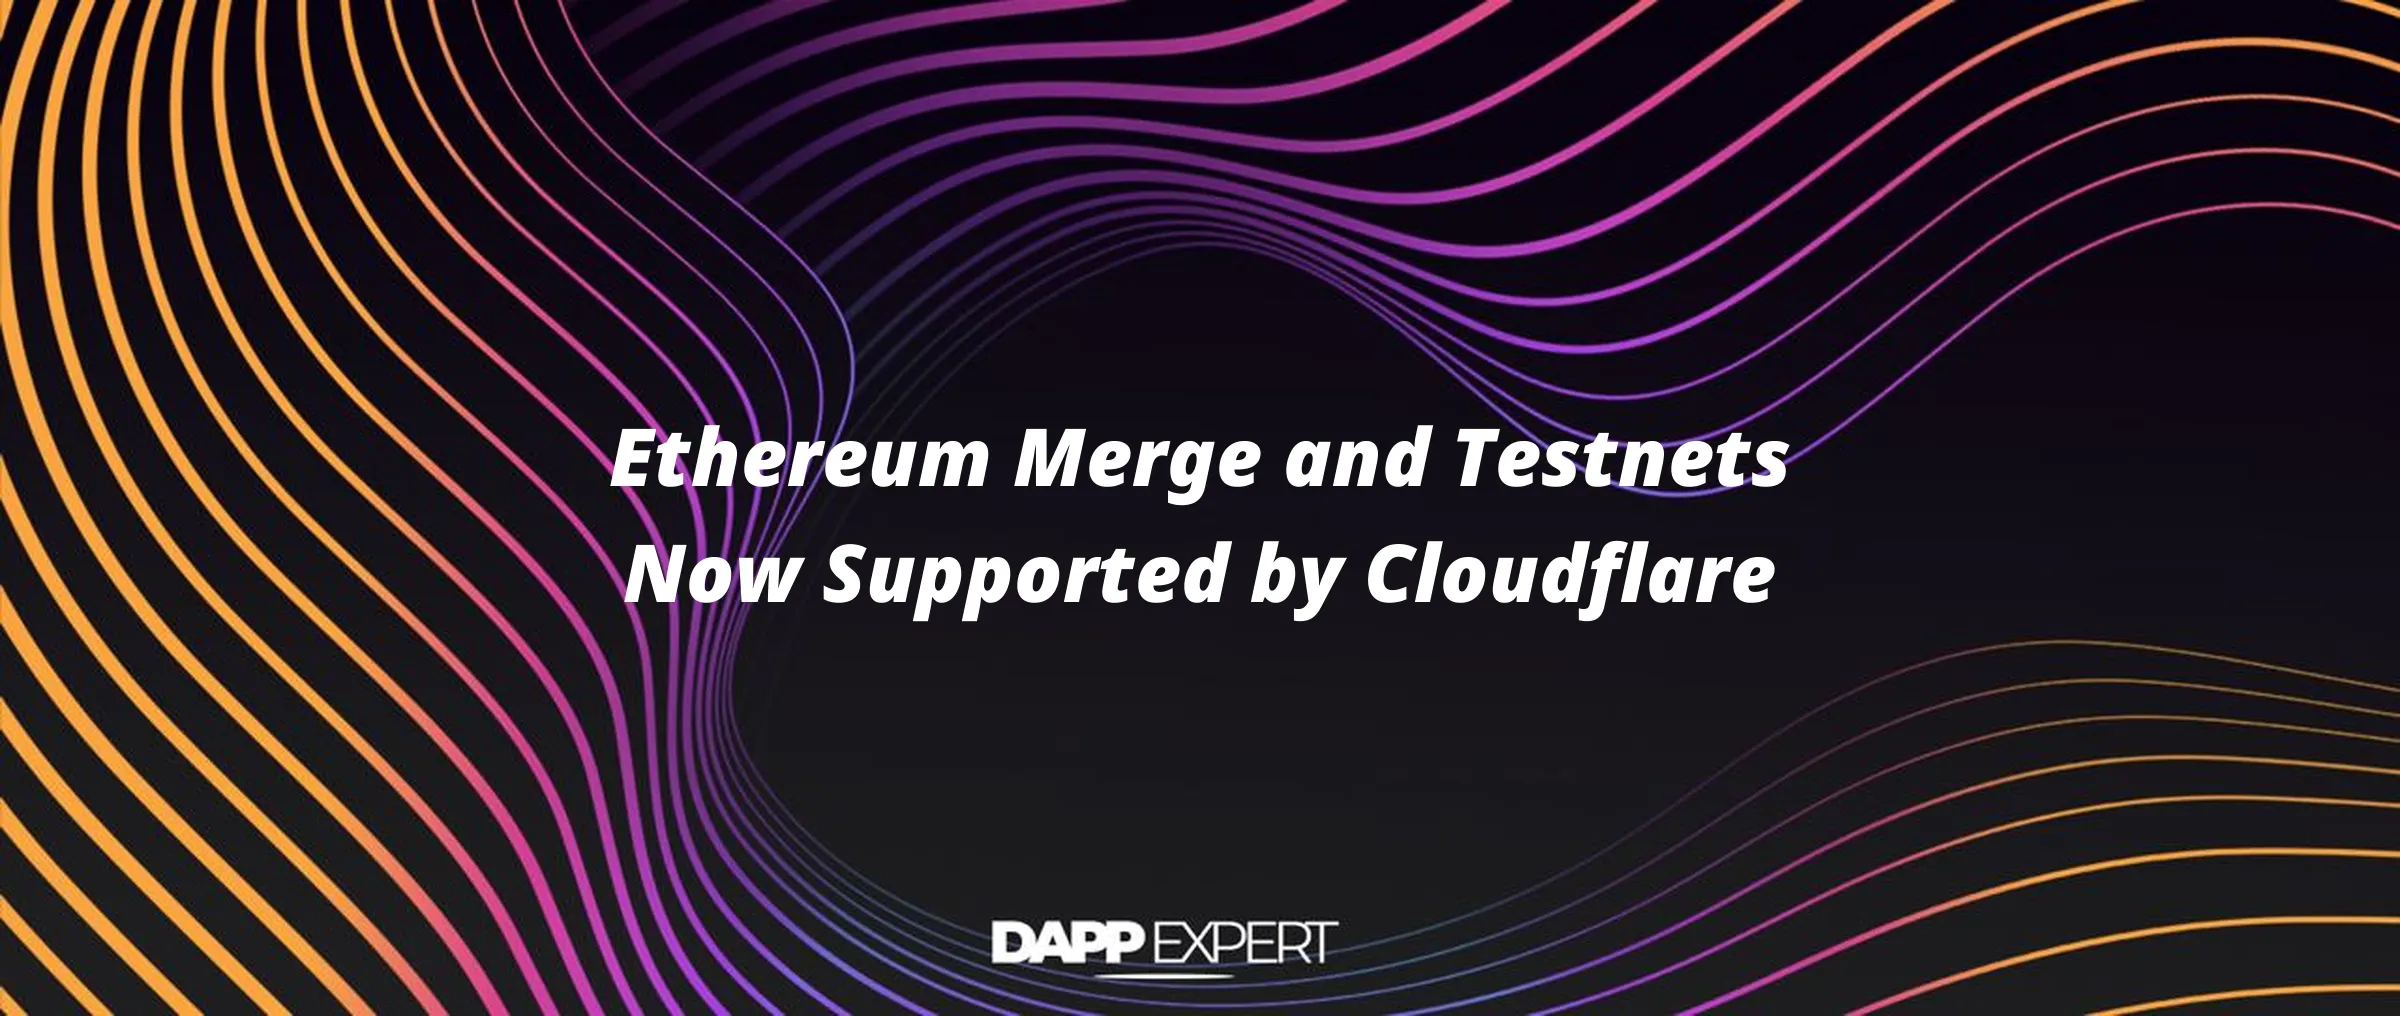 Ethereum Merge and Testnets Now Supported by Cloudflare